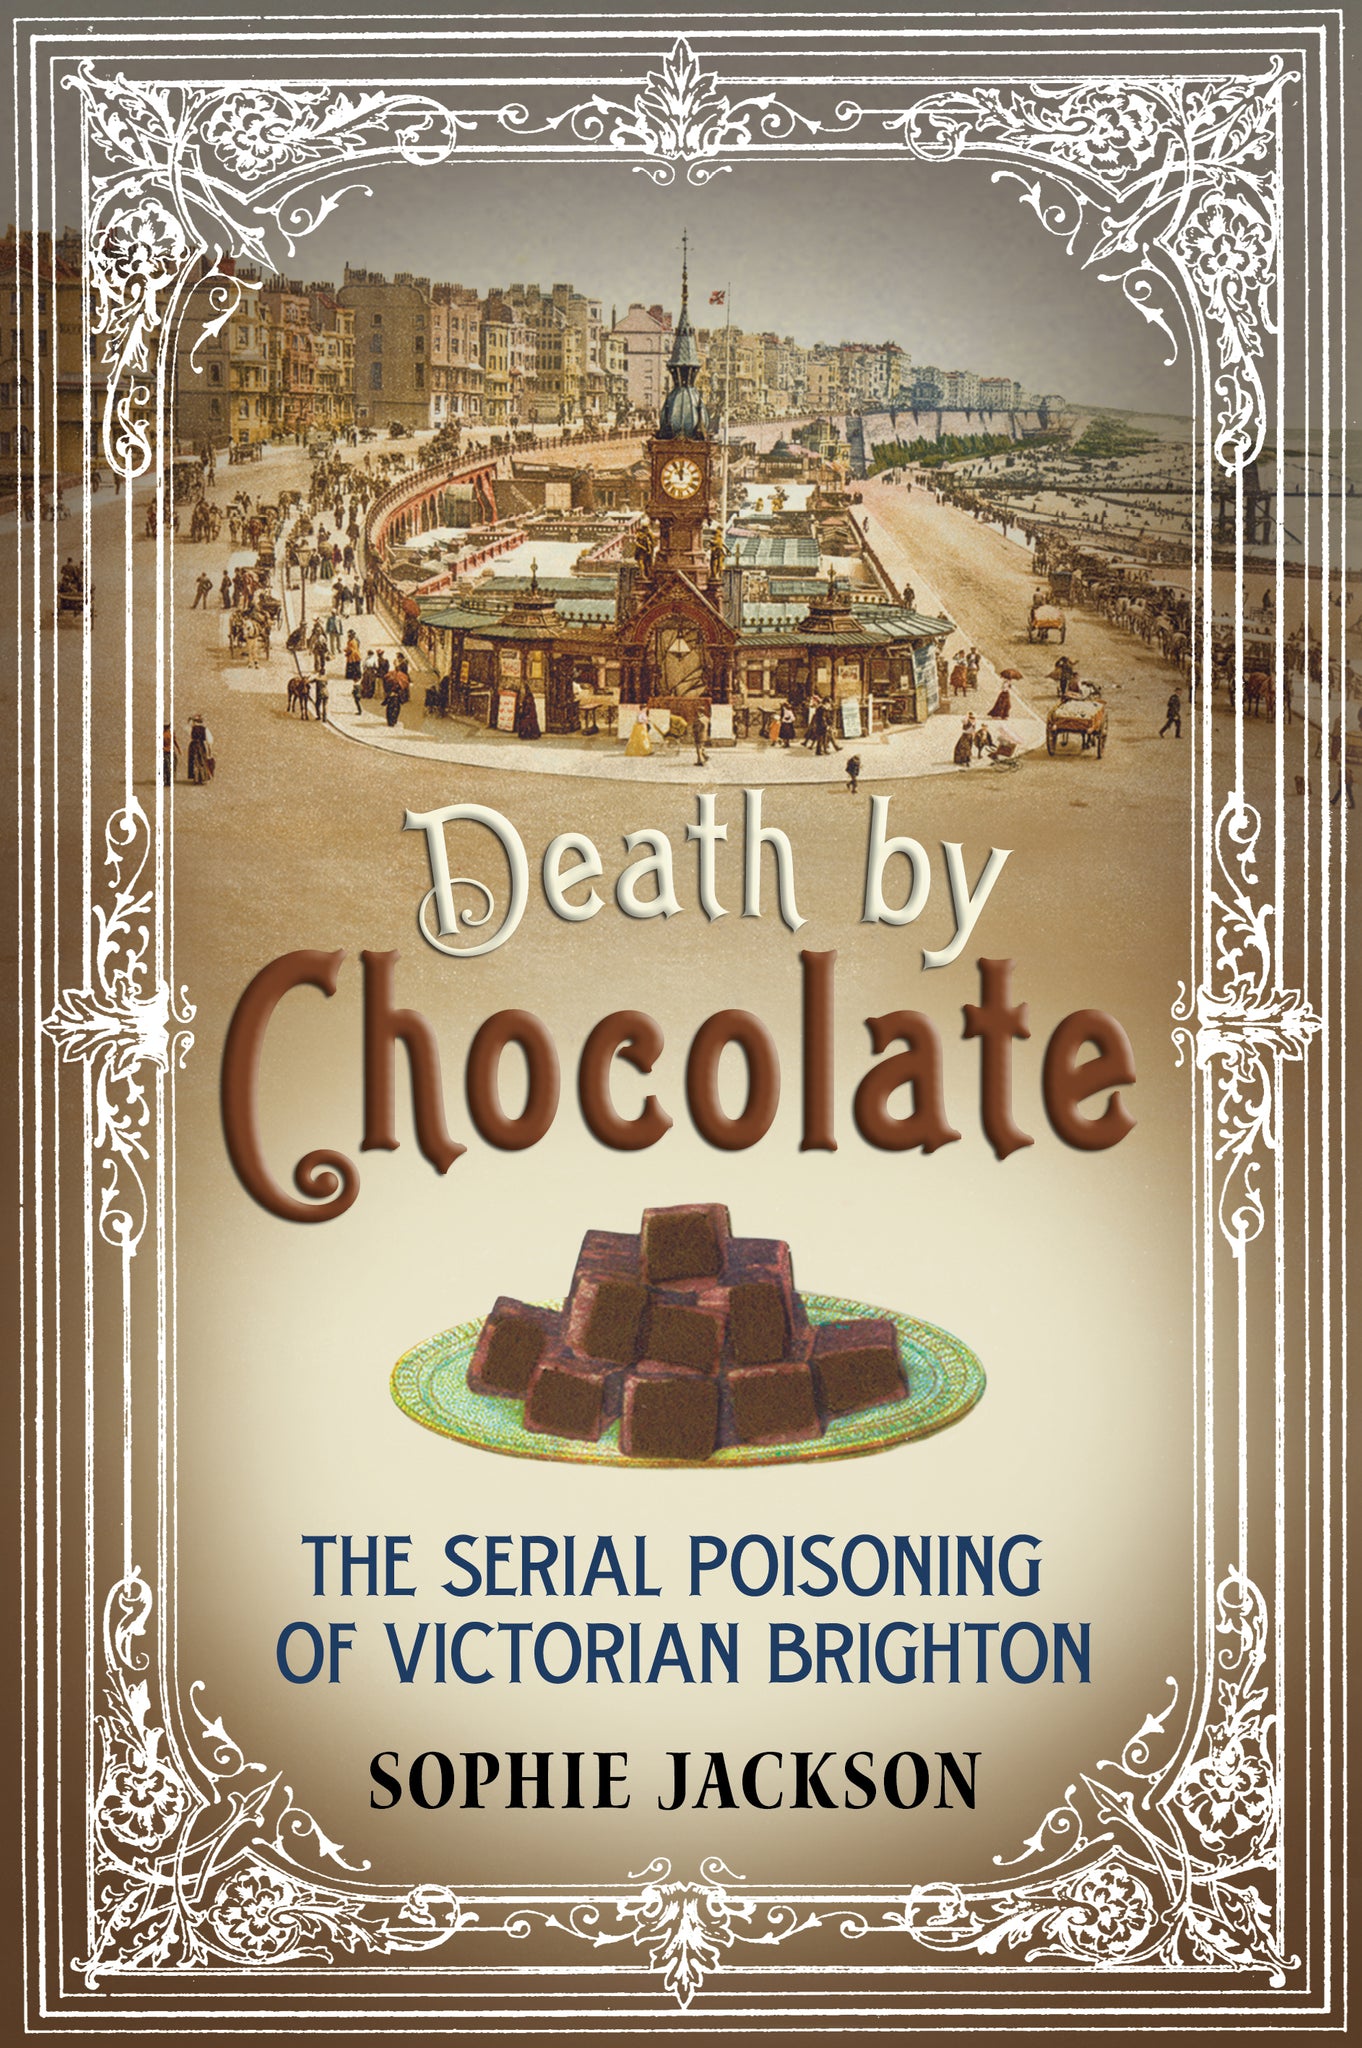 Death by Chocolate: The Serial Poisoning of Victorian Brighton